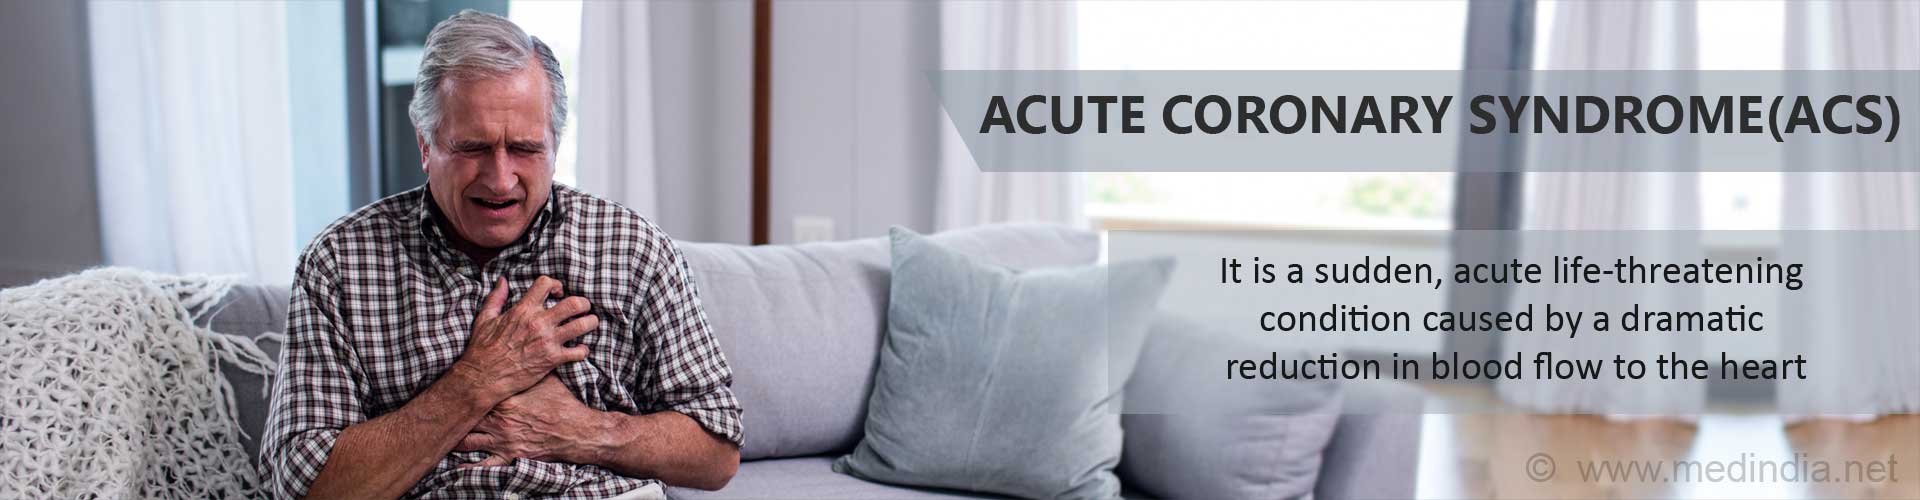 Acute coronary syndrome (ACS) is a sudden, acute life-threatening condition caused by a dramatic reduction in blood flow to the heart.